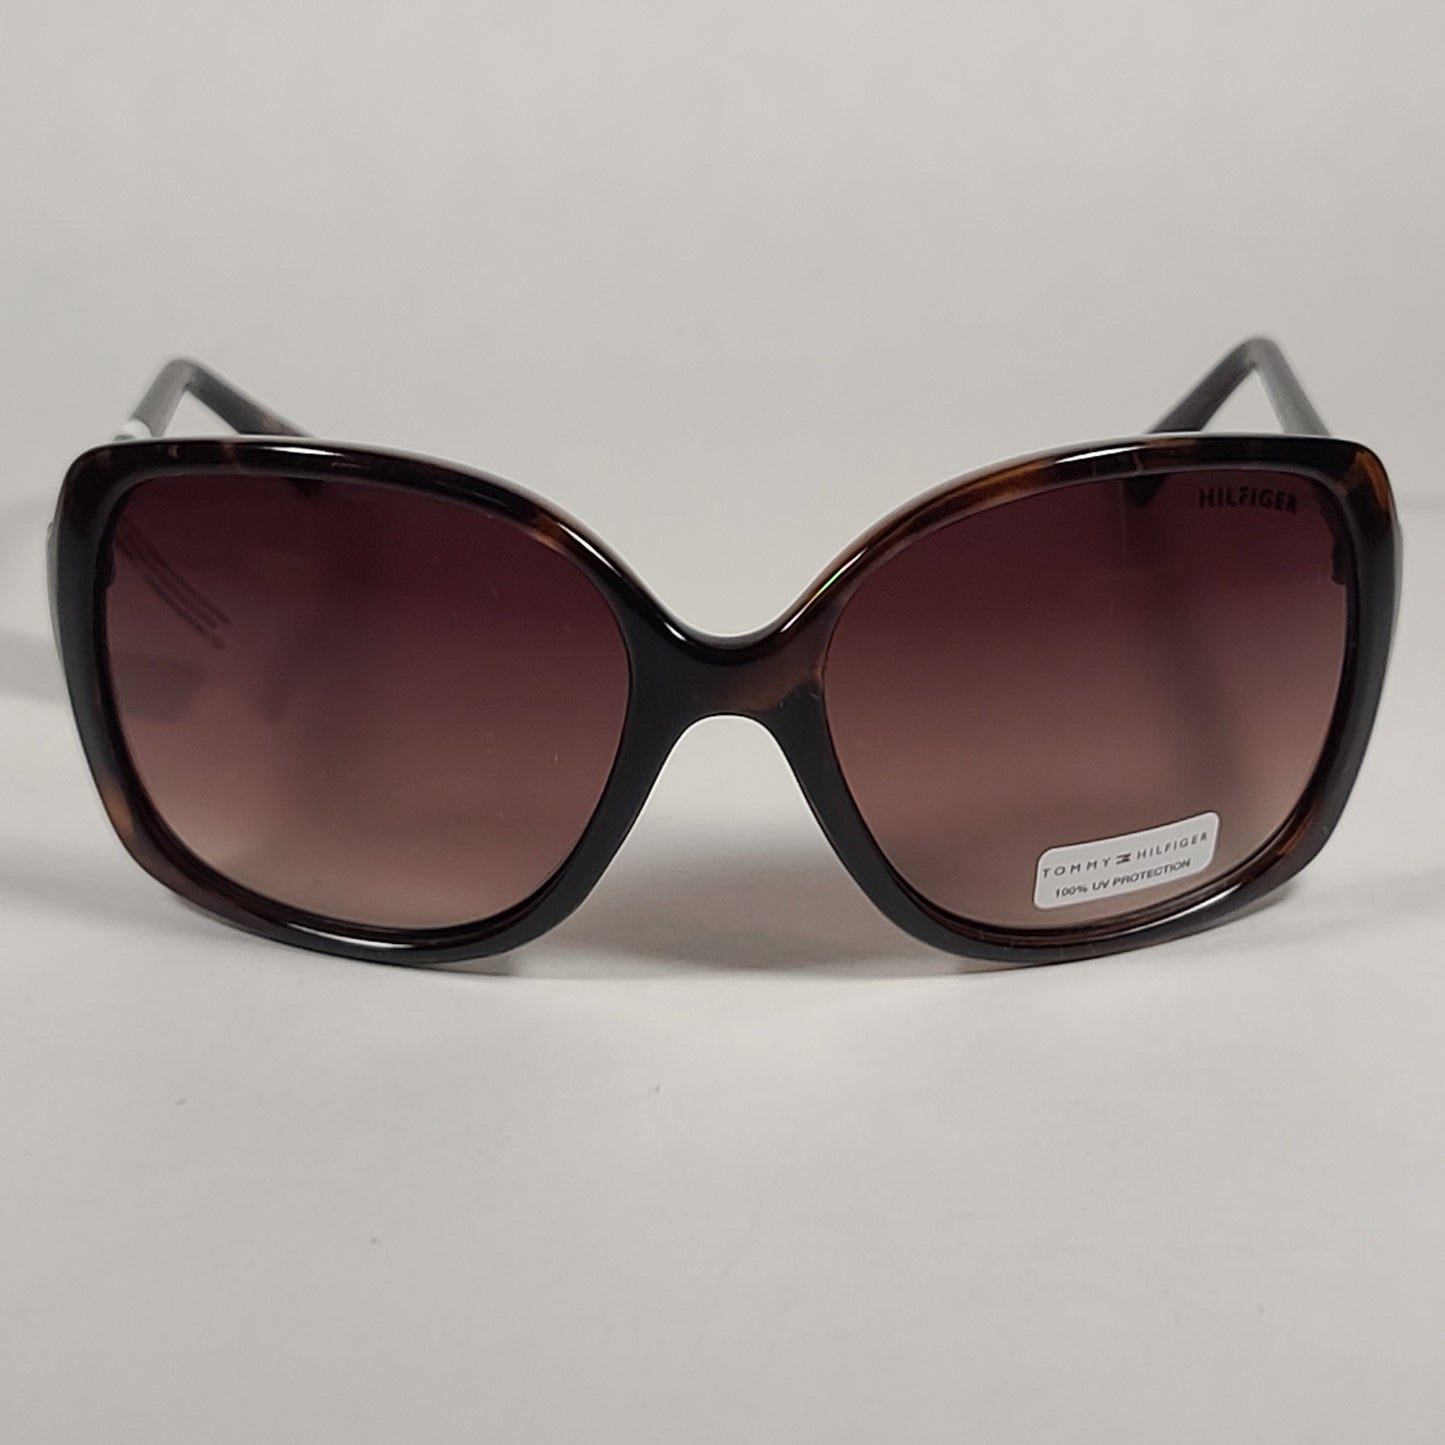 Tommy Hilfiger Hermione Butterfly Sunglasses Brown Tortoise Frame Brown Gradient Lens HERMIONE WP OL474 - Sunglasses